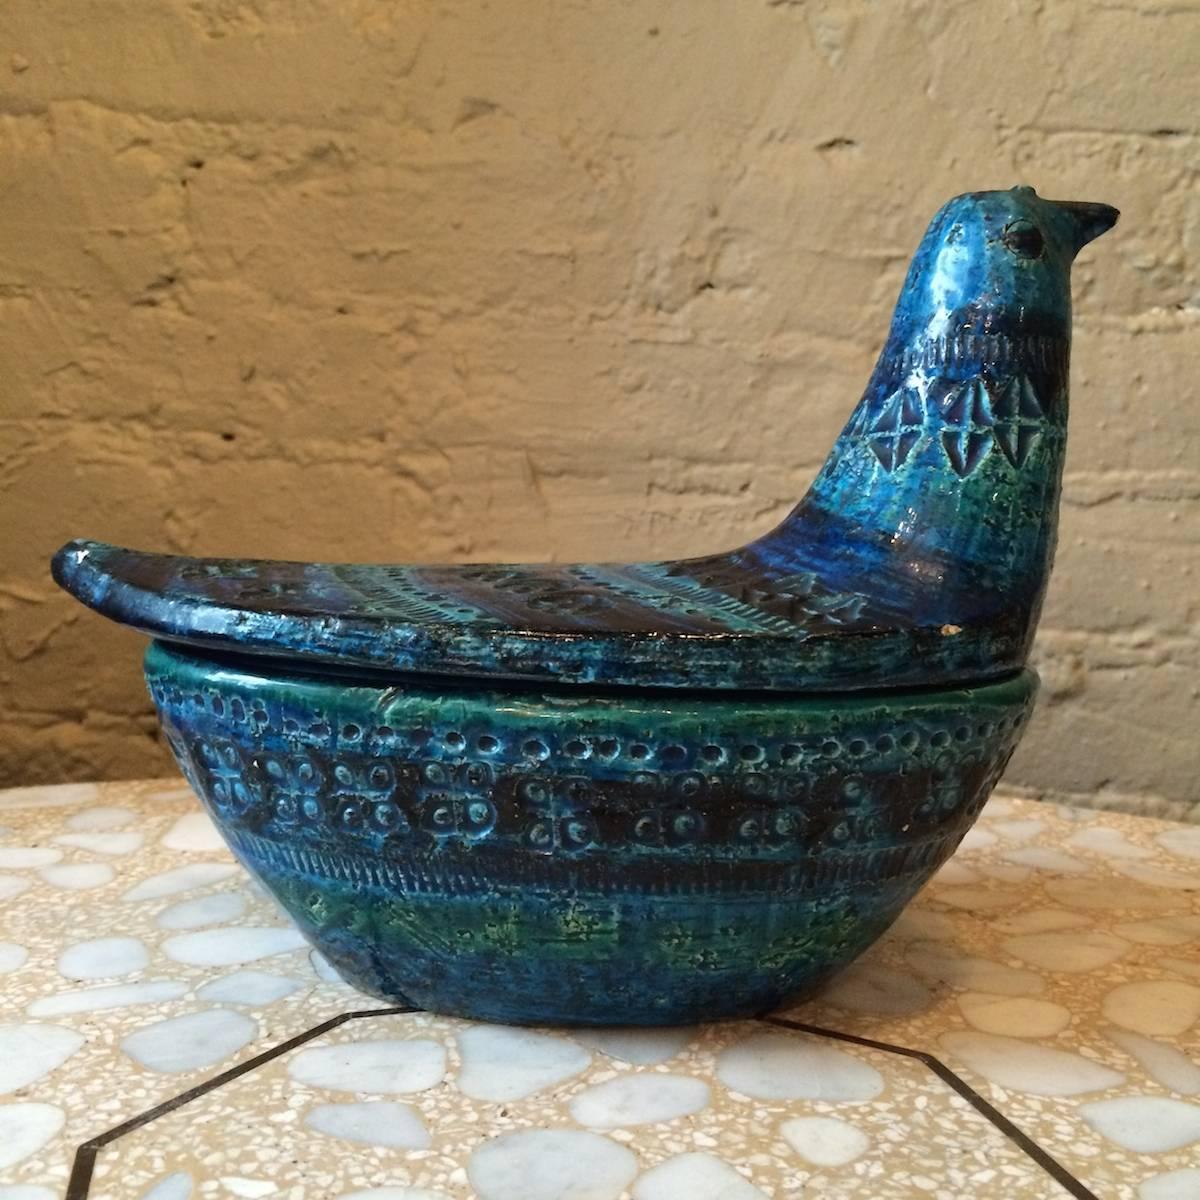 Lovely, Mid-Century Modern, decorative sculpture, art pottery vessel by Aldo Londi for Bitossi, Italy, in his Rimini Blue pattern.